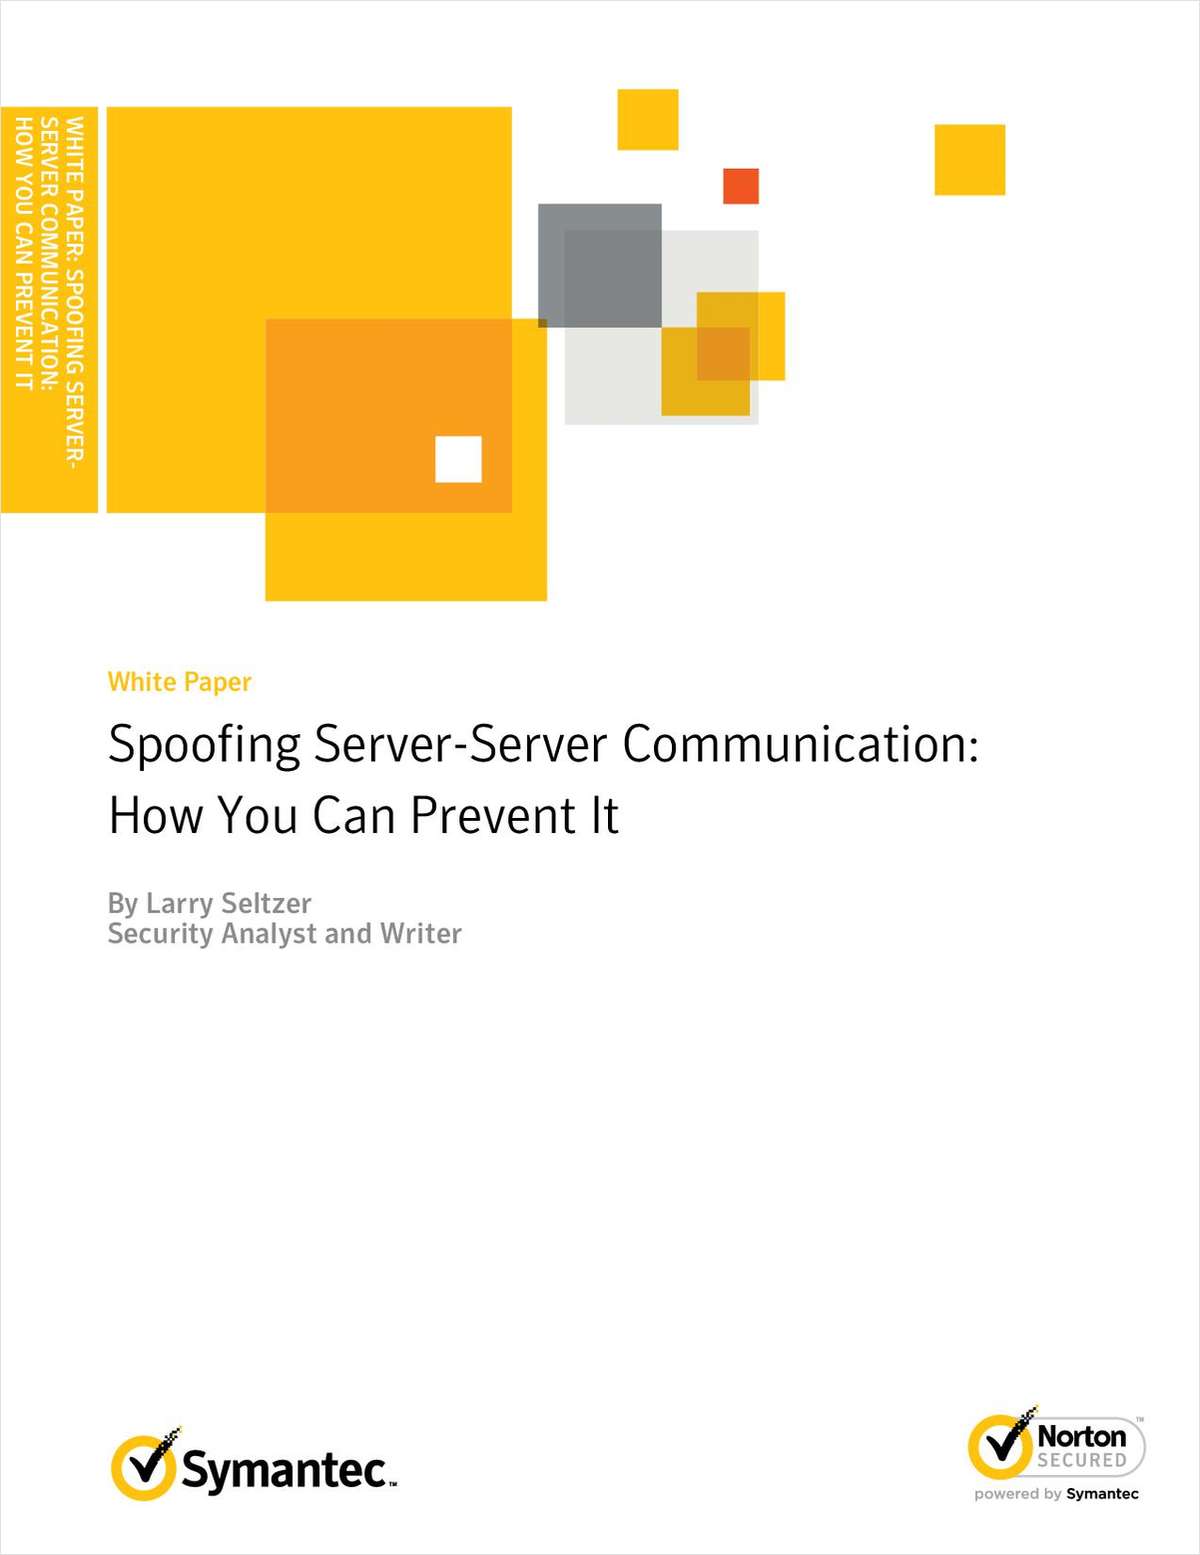 Spoofing Server-Server Communication: How You Can Prevent It